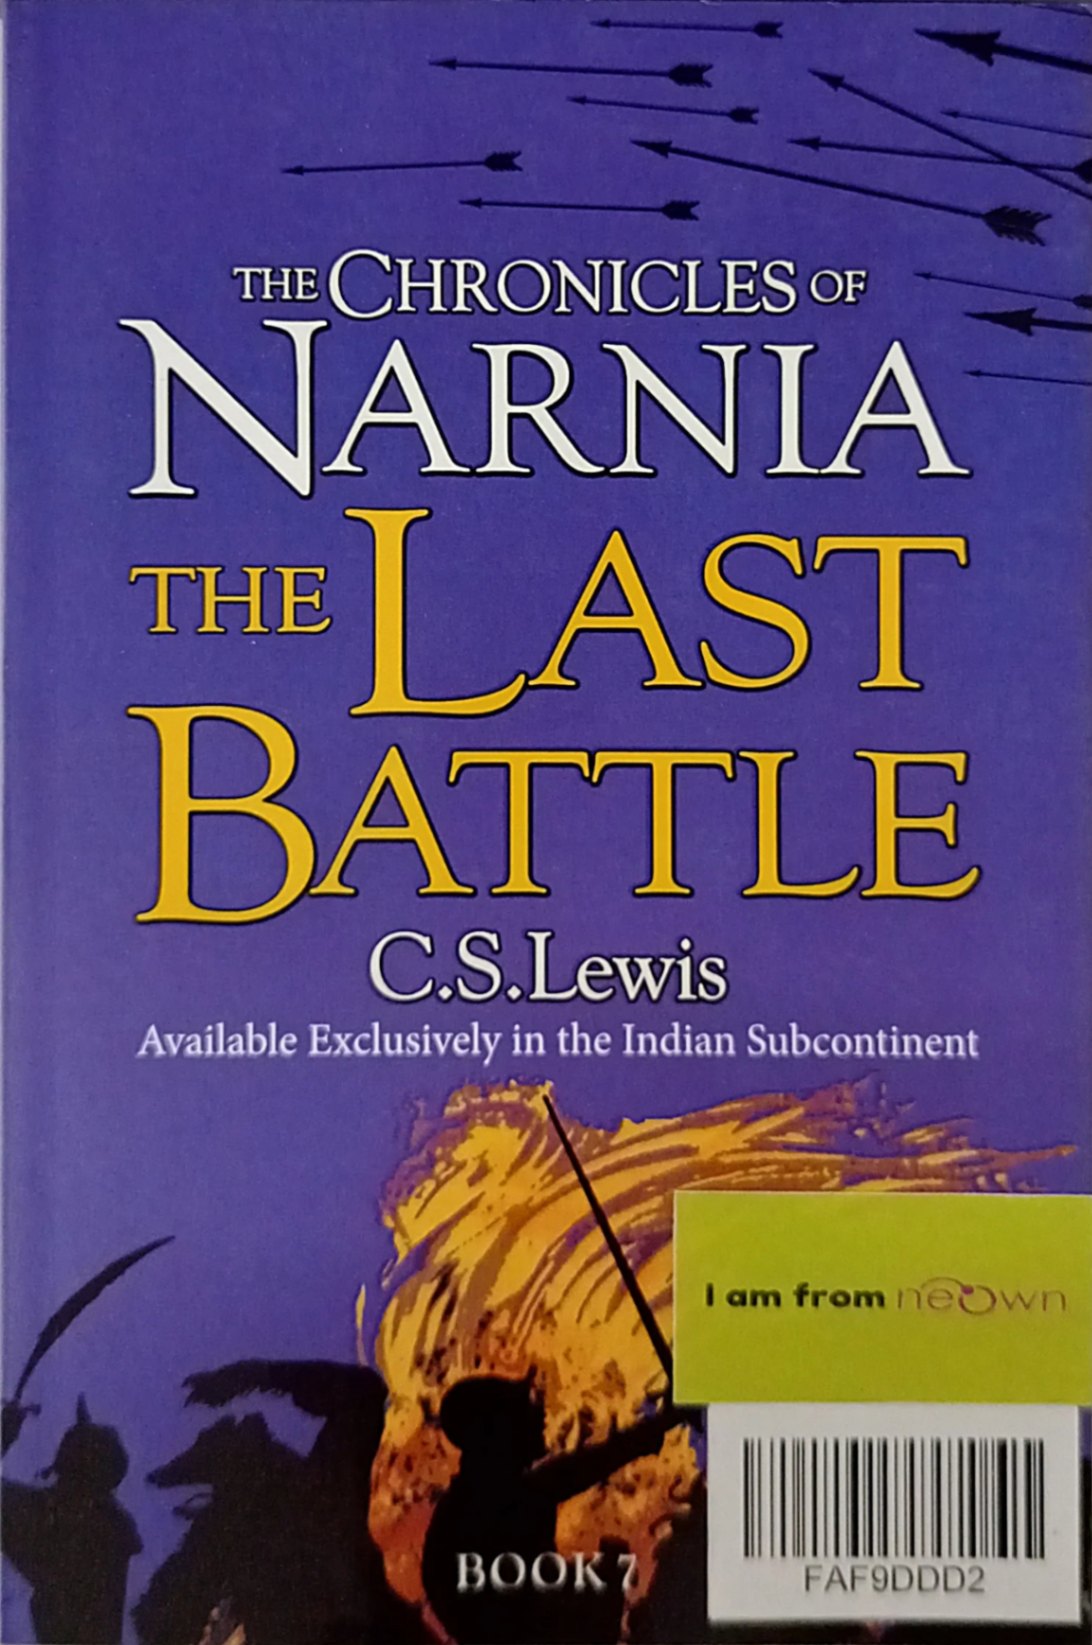 The Chronicles of Narnia -The Last Battle